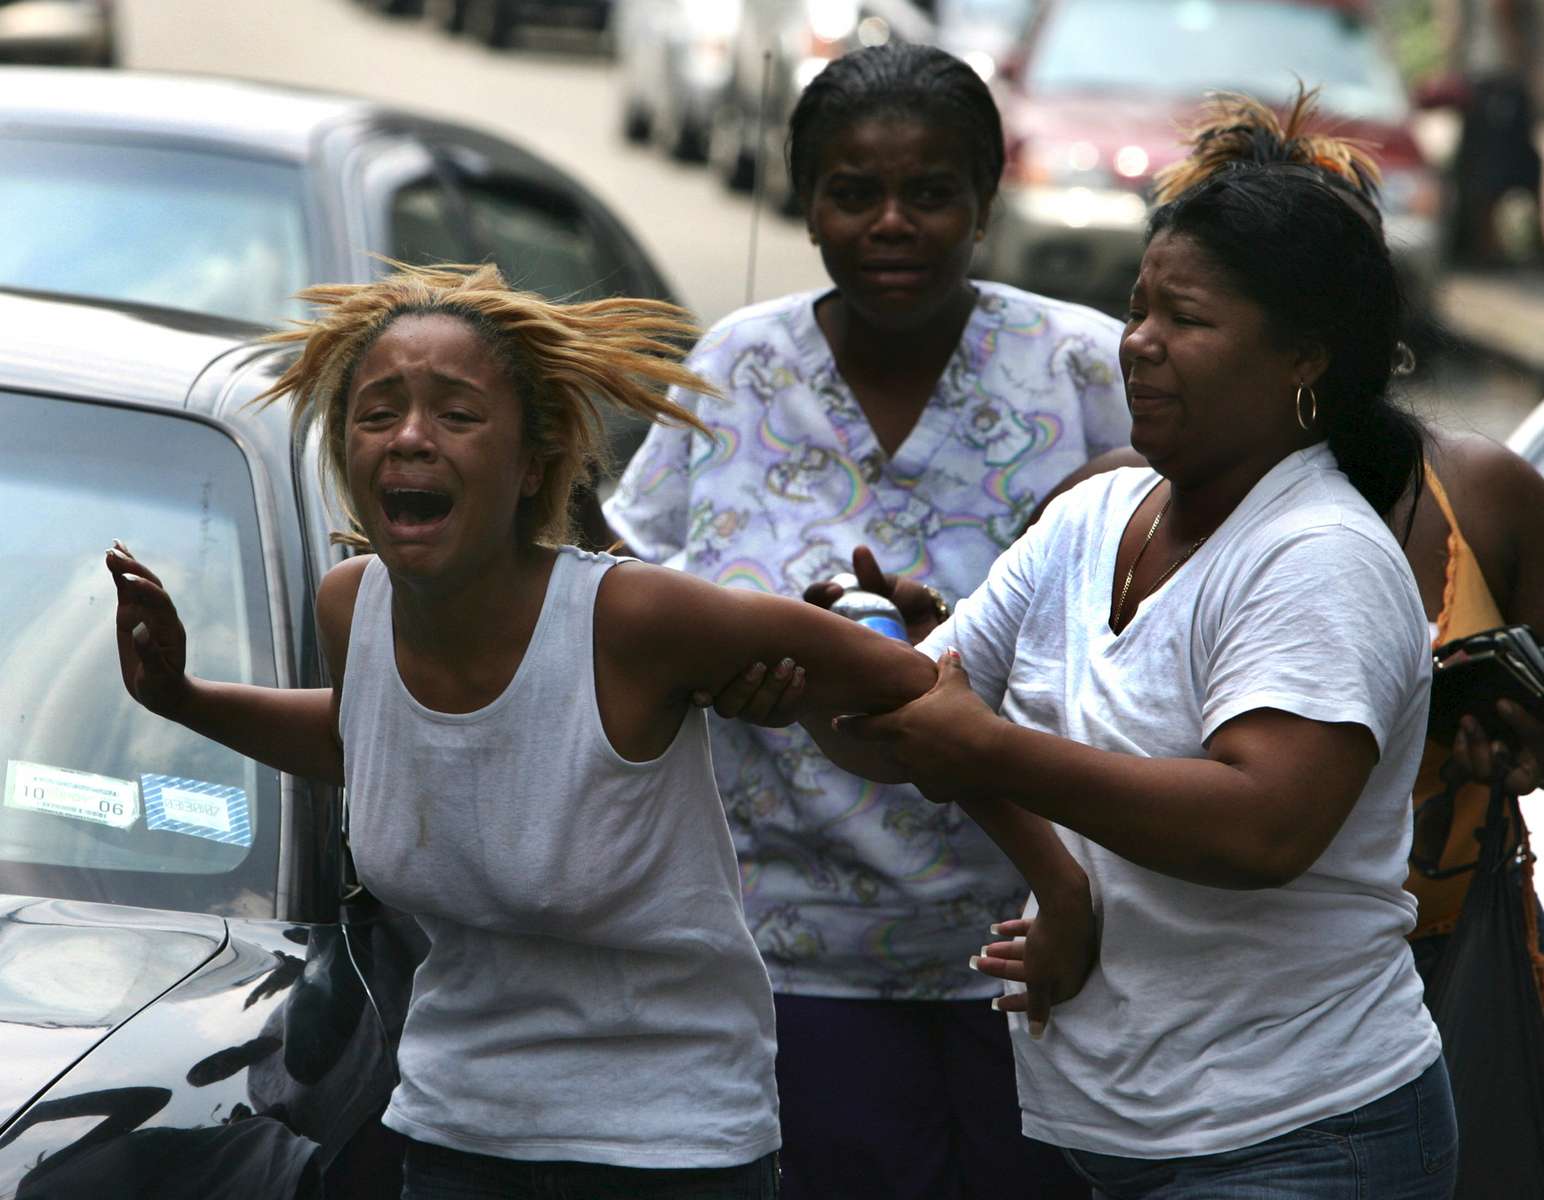 Shataiva Mills, 18, (left) is comforted by her mother after learning of the death of her fiance, Keywann Gardiner, who was killed with 4 other family members in a four-car pileup on the Bronx River Parkway on July 10, 2006. 